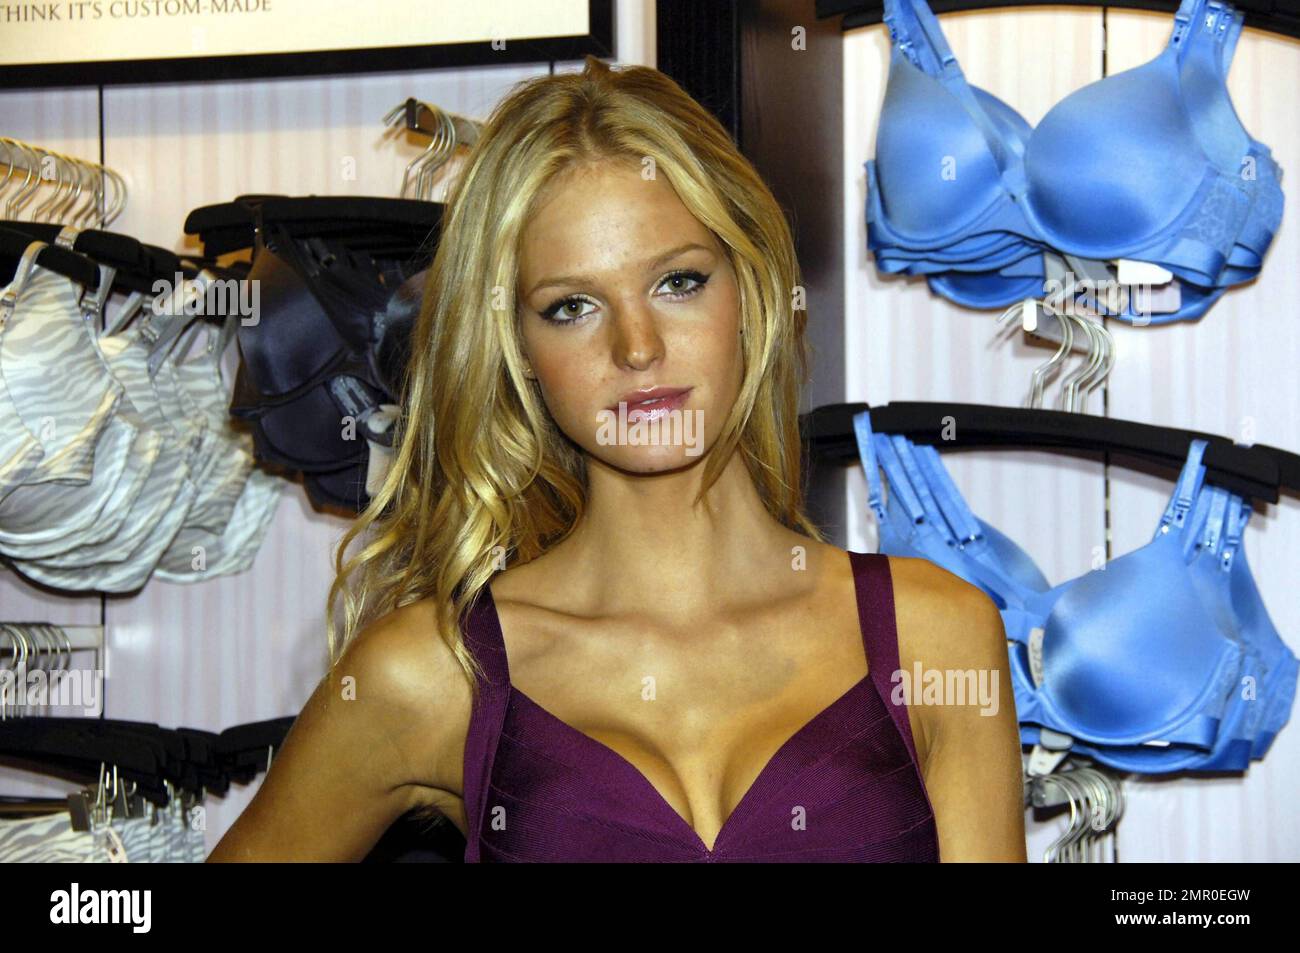 https://c8.alamy.com/comp/2MR0EGW/victorias-secret-angel-and-chicago-native-erin-heatherton-signs-autographs-at-the-re-opening-of-the-oakbrook-victorias-secret-store-heatherton-presented-the-new-biofit-collection-in-the-new-fall-colors-couture-fuchsia-and-kitten-leopard-as-well-as-showcase-the-oakbrook-stores-stylish-new-look-customers-who-purchased-any-bra-from-the-biofit-collection-at-the-event-were-automatically-moved-to-the-front-of-the-line-to-meet-heatherton-chicago-il-92110-2MR0EGW.jpg